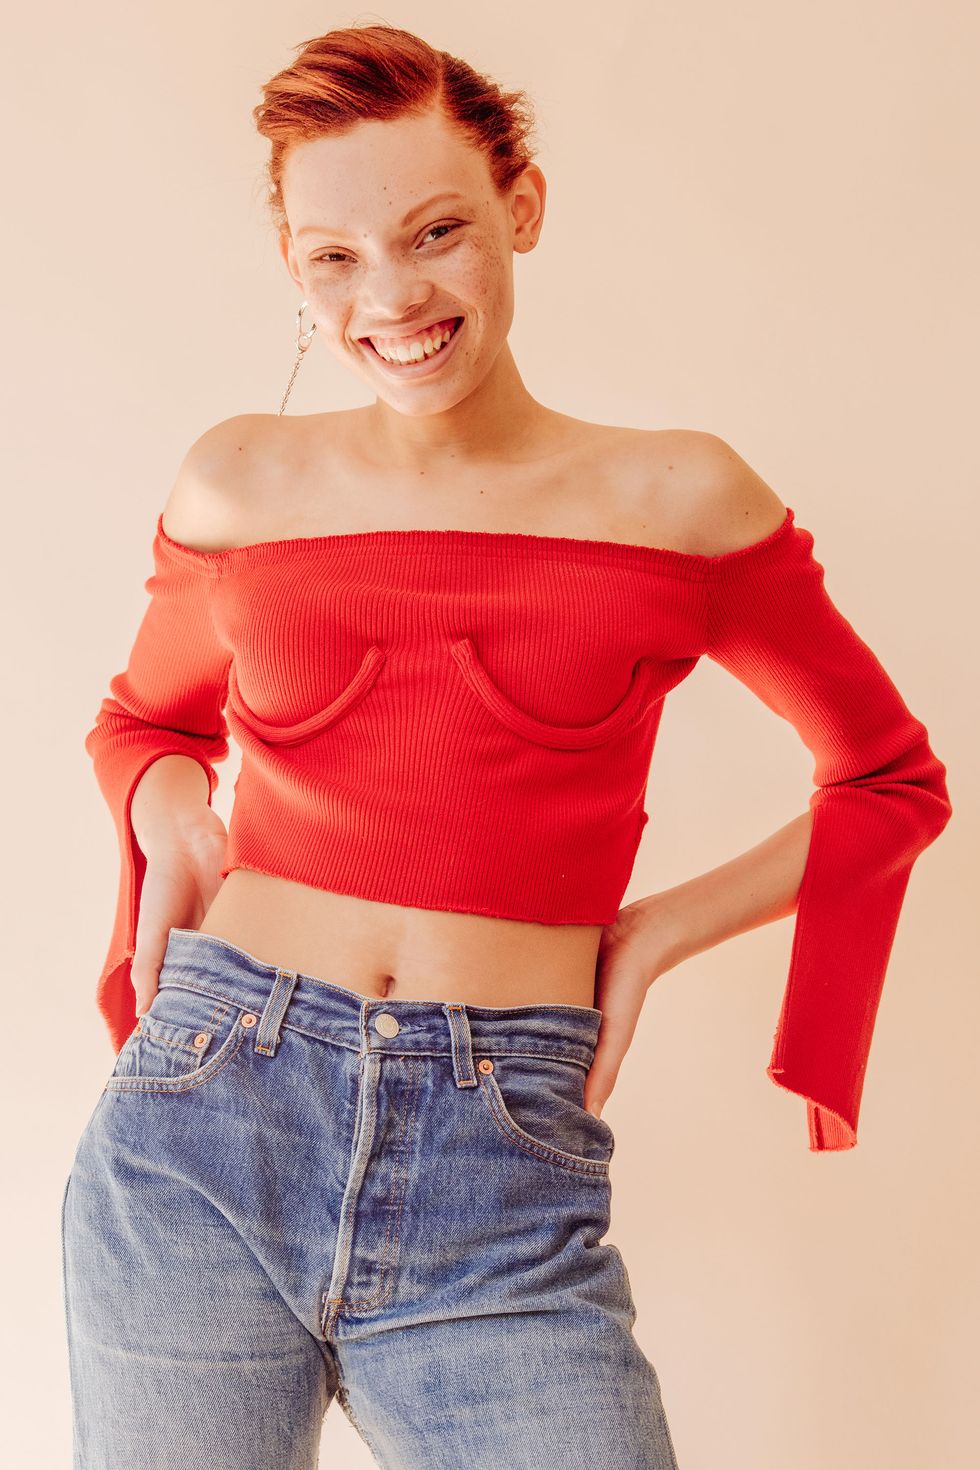 Shoulder, Clothing, Red, Jeans, Joint, Skin, Beauty, Waist, Blond, Yellow, 